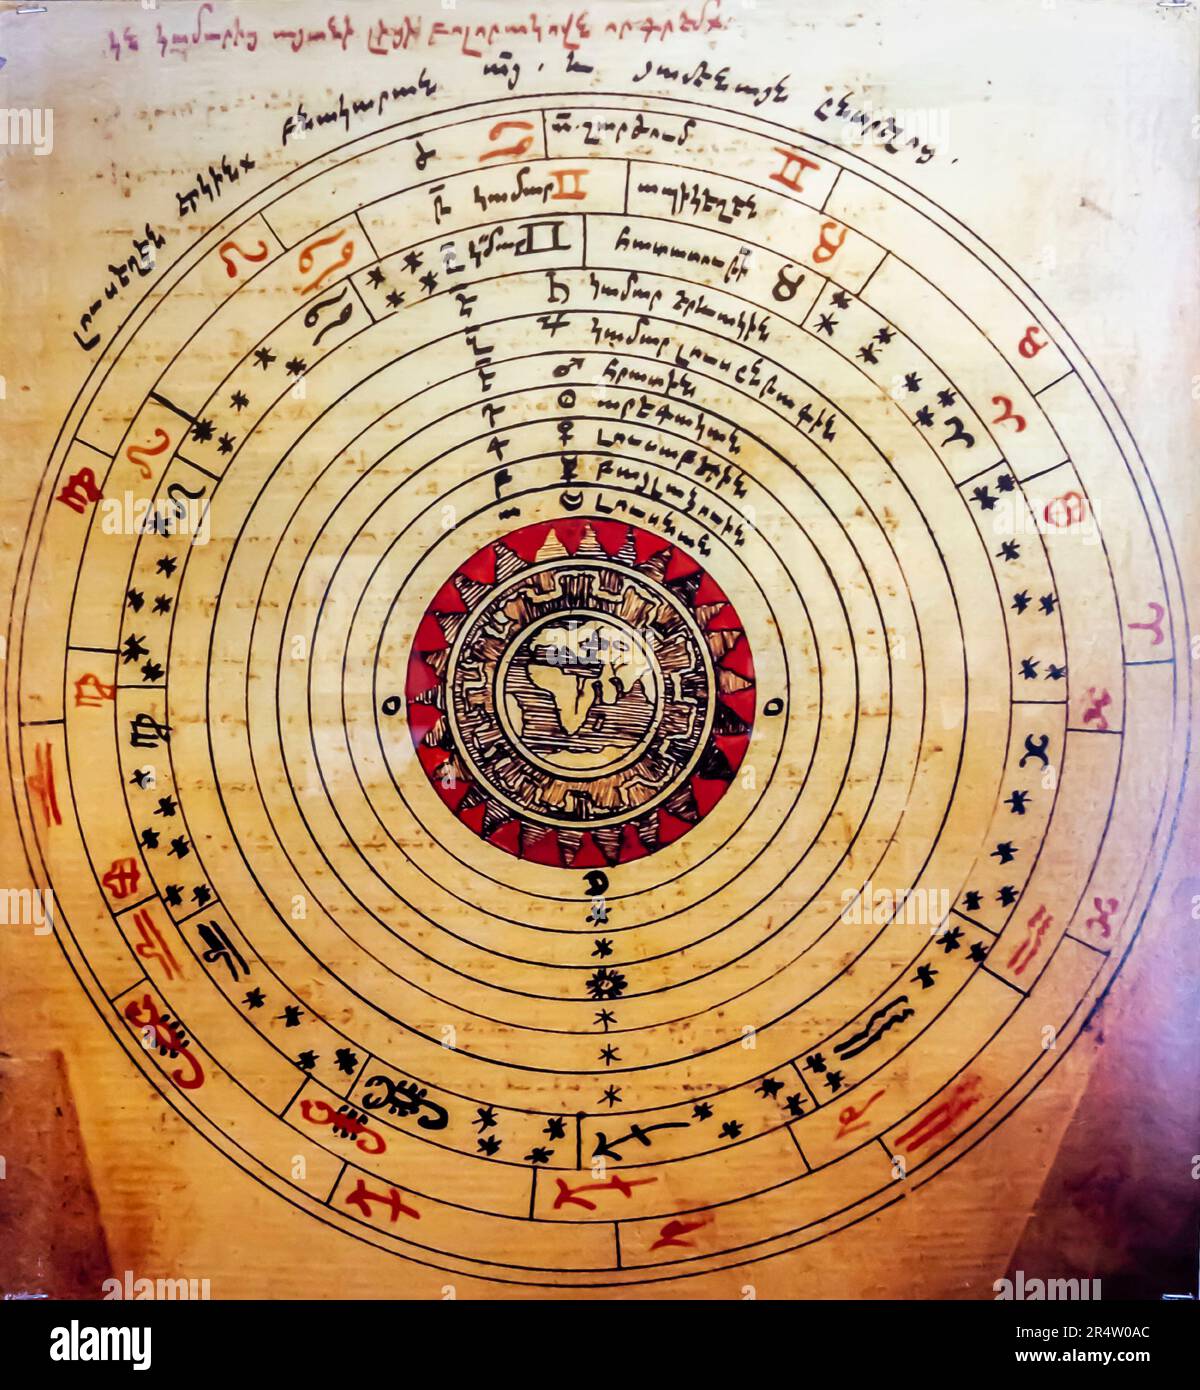 Historic Armenian books. The world, the planets, and the zodiac according to Ptolemy's geography - 2nd century A.D. manuscript of 1617 Stock Photo